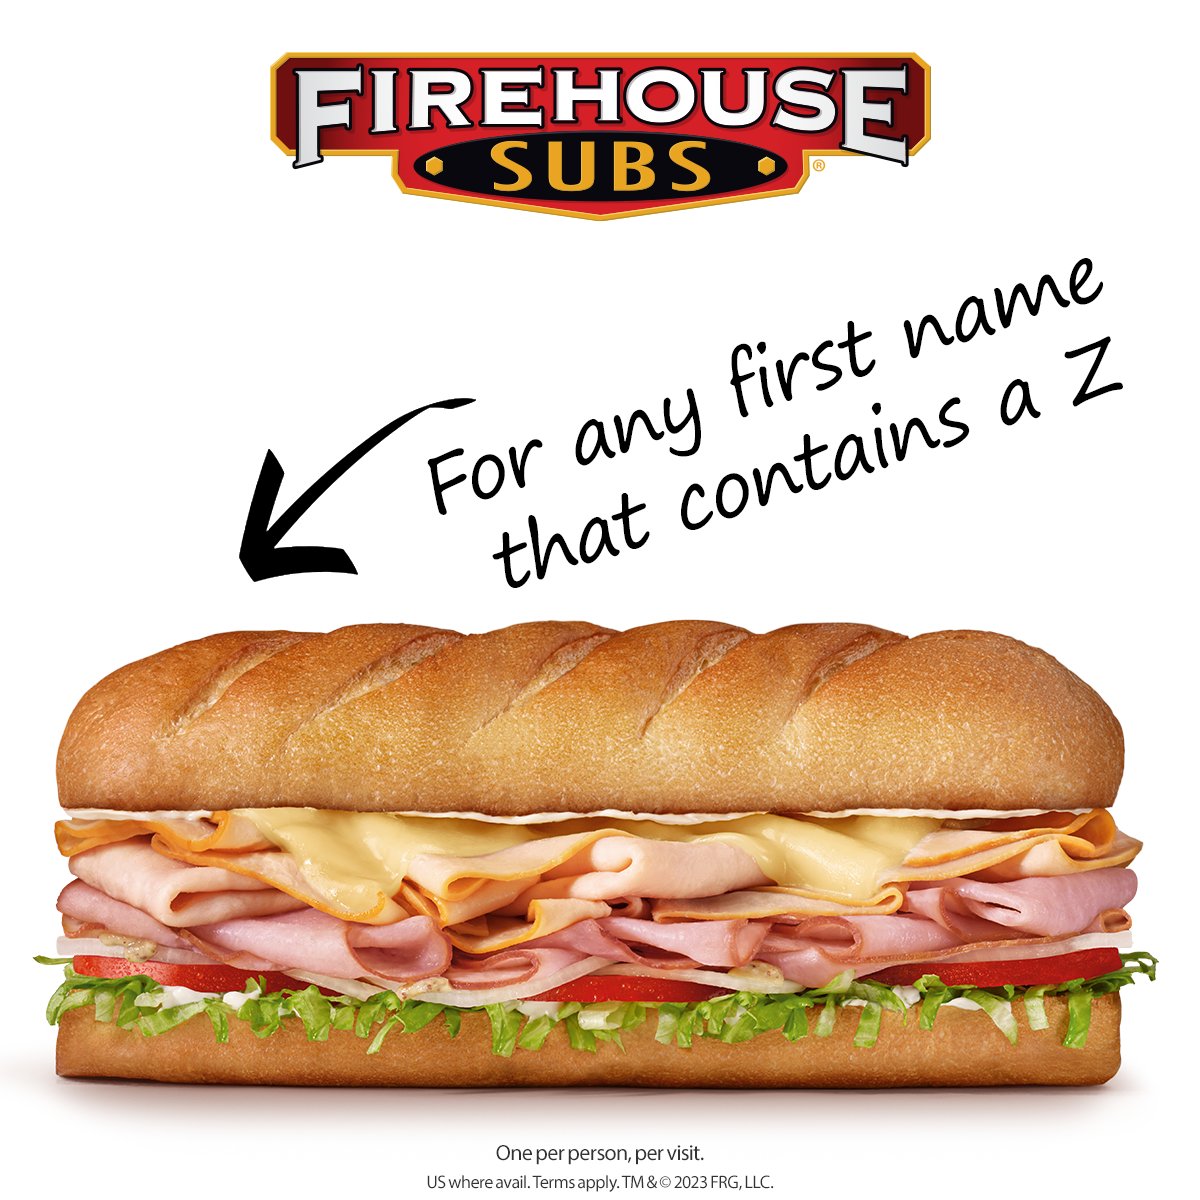 This is gonna be a fun one 😎

If your first name contains​ a Z (like Enzo or Zion), show your photo ID at any U.S. Firehouse Subs TODAY, 6/21, and get a FREE medium sub with any purchase!

New name tomorrow, so be sure to check here: firehousesubs.com/nameoftheday